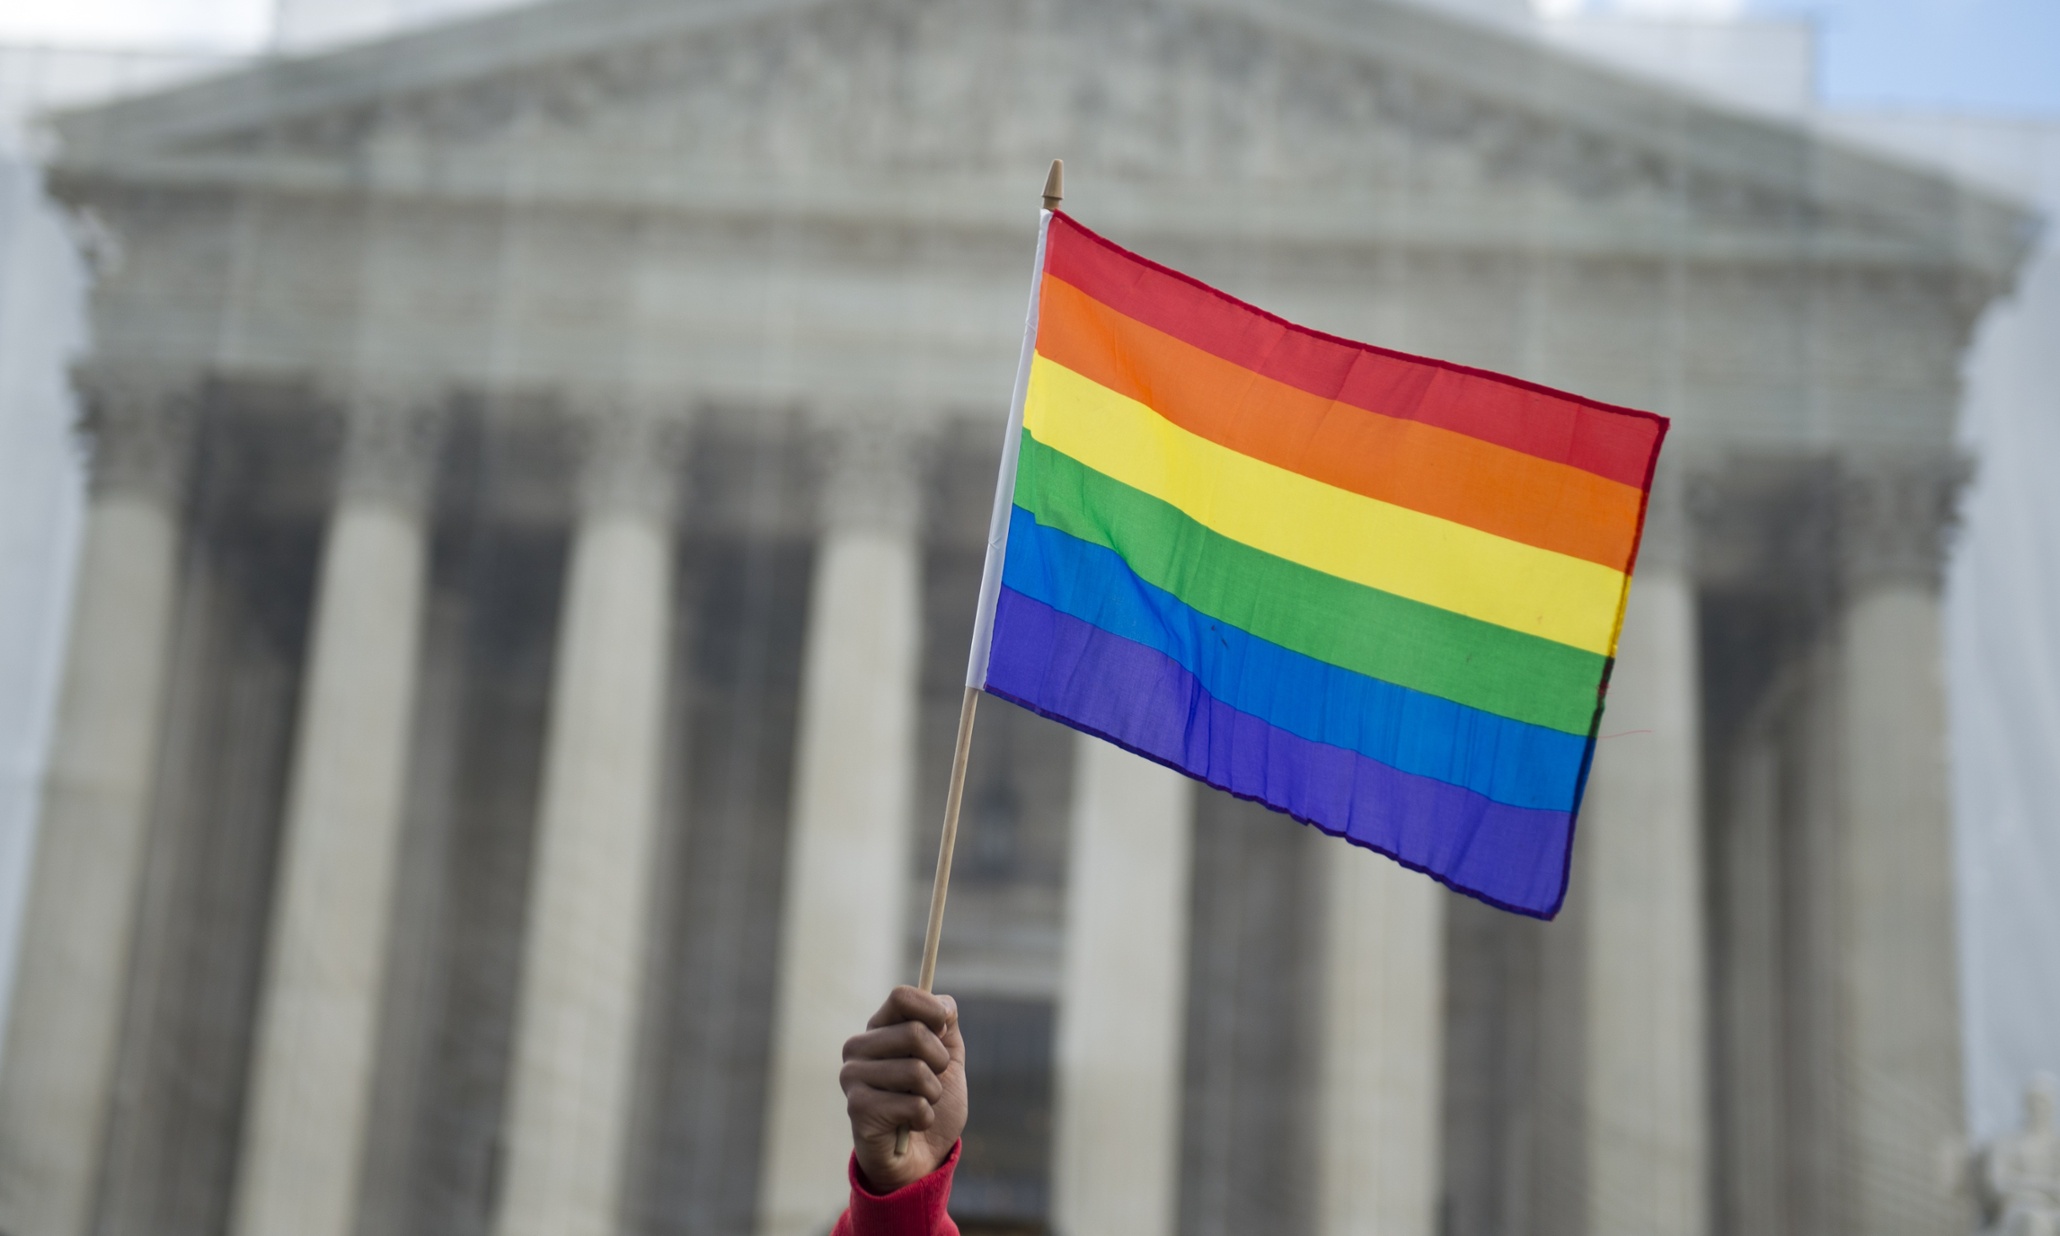 Alabama Probate Judges Cannot Issue Same Sex Marriage Licenses Anymore • Utah People S Post